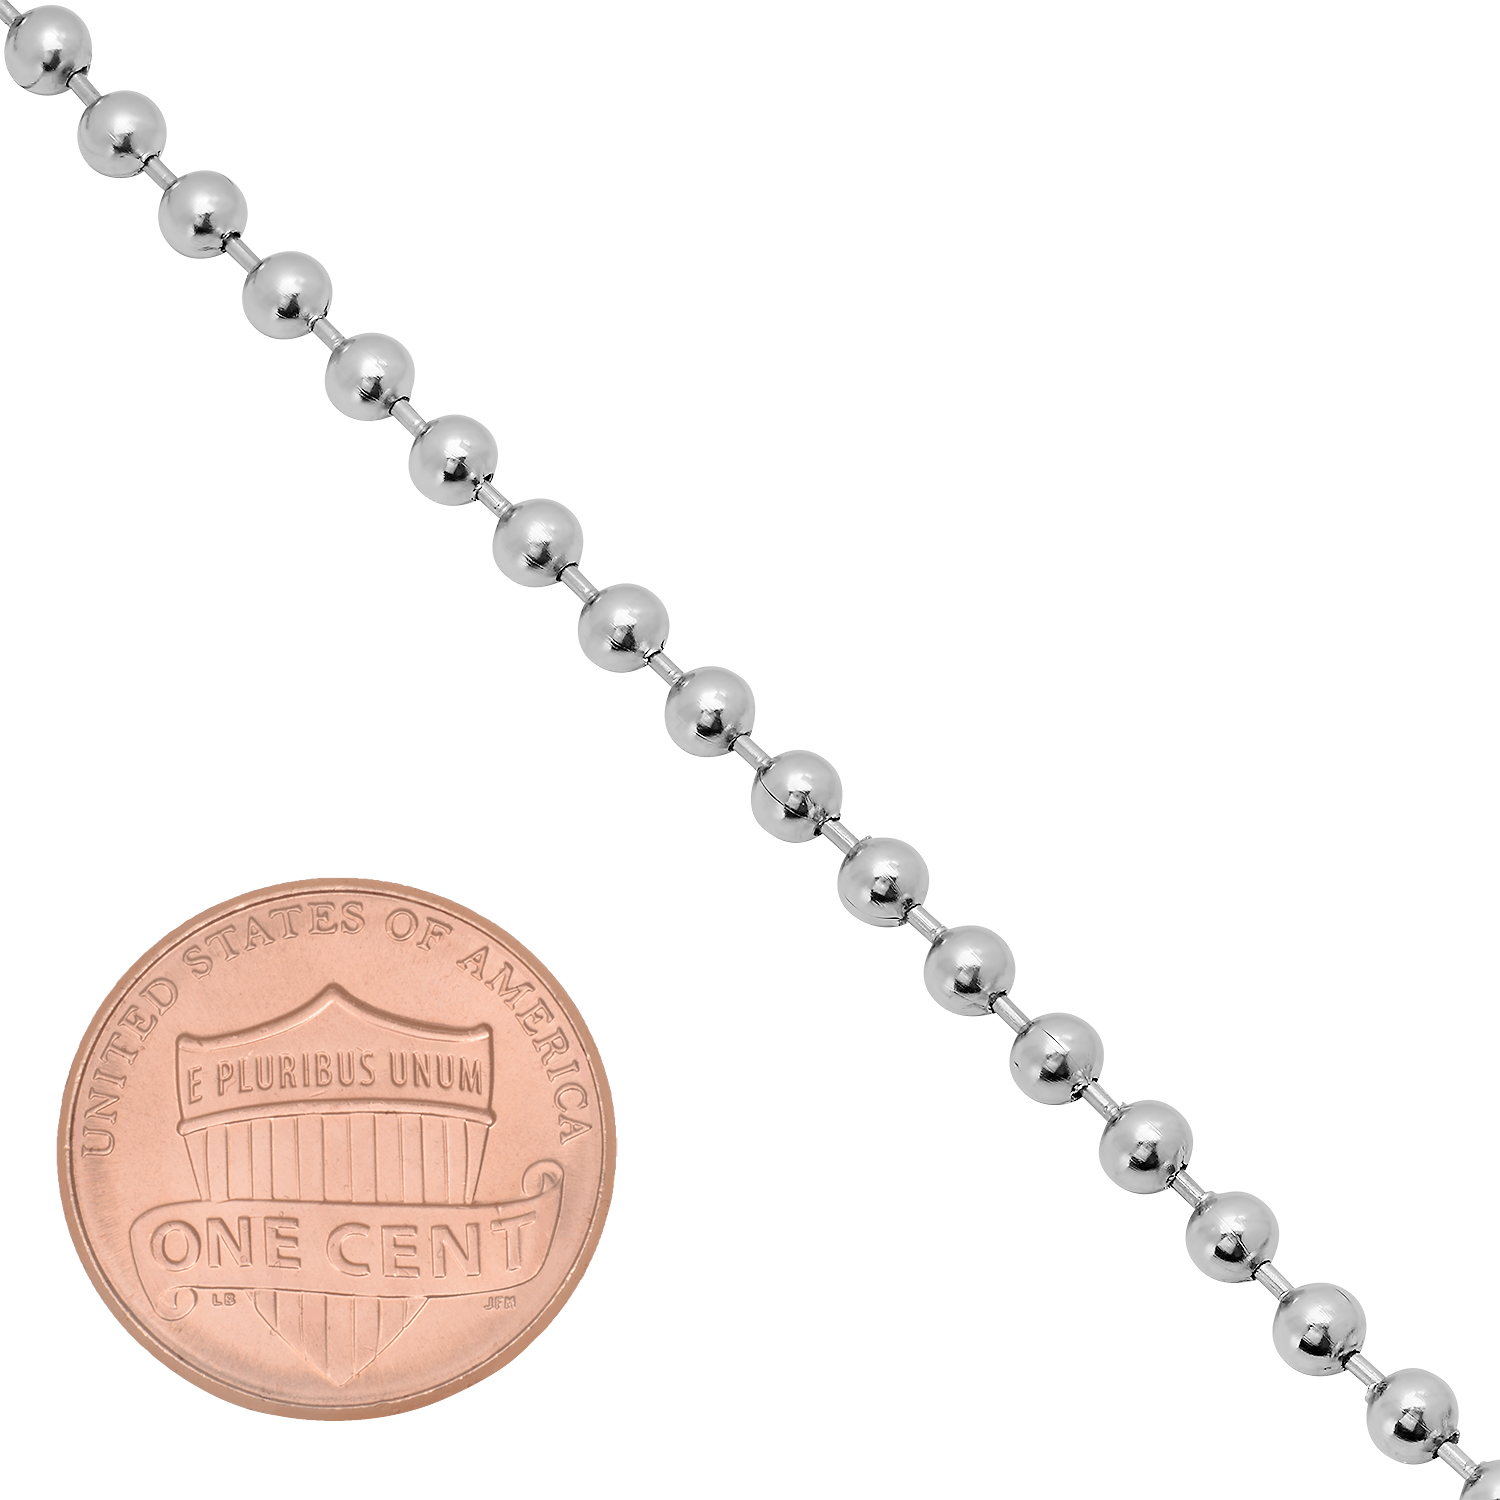 6mm High-Polished Stainless Steel Military Ball Chain Necklace, 24 inches +  Gift Box 